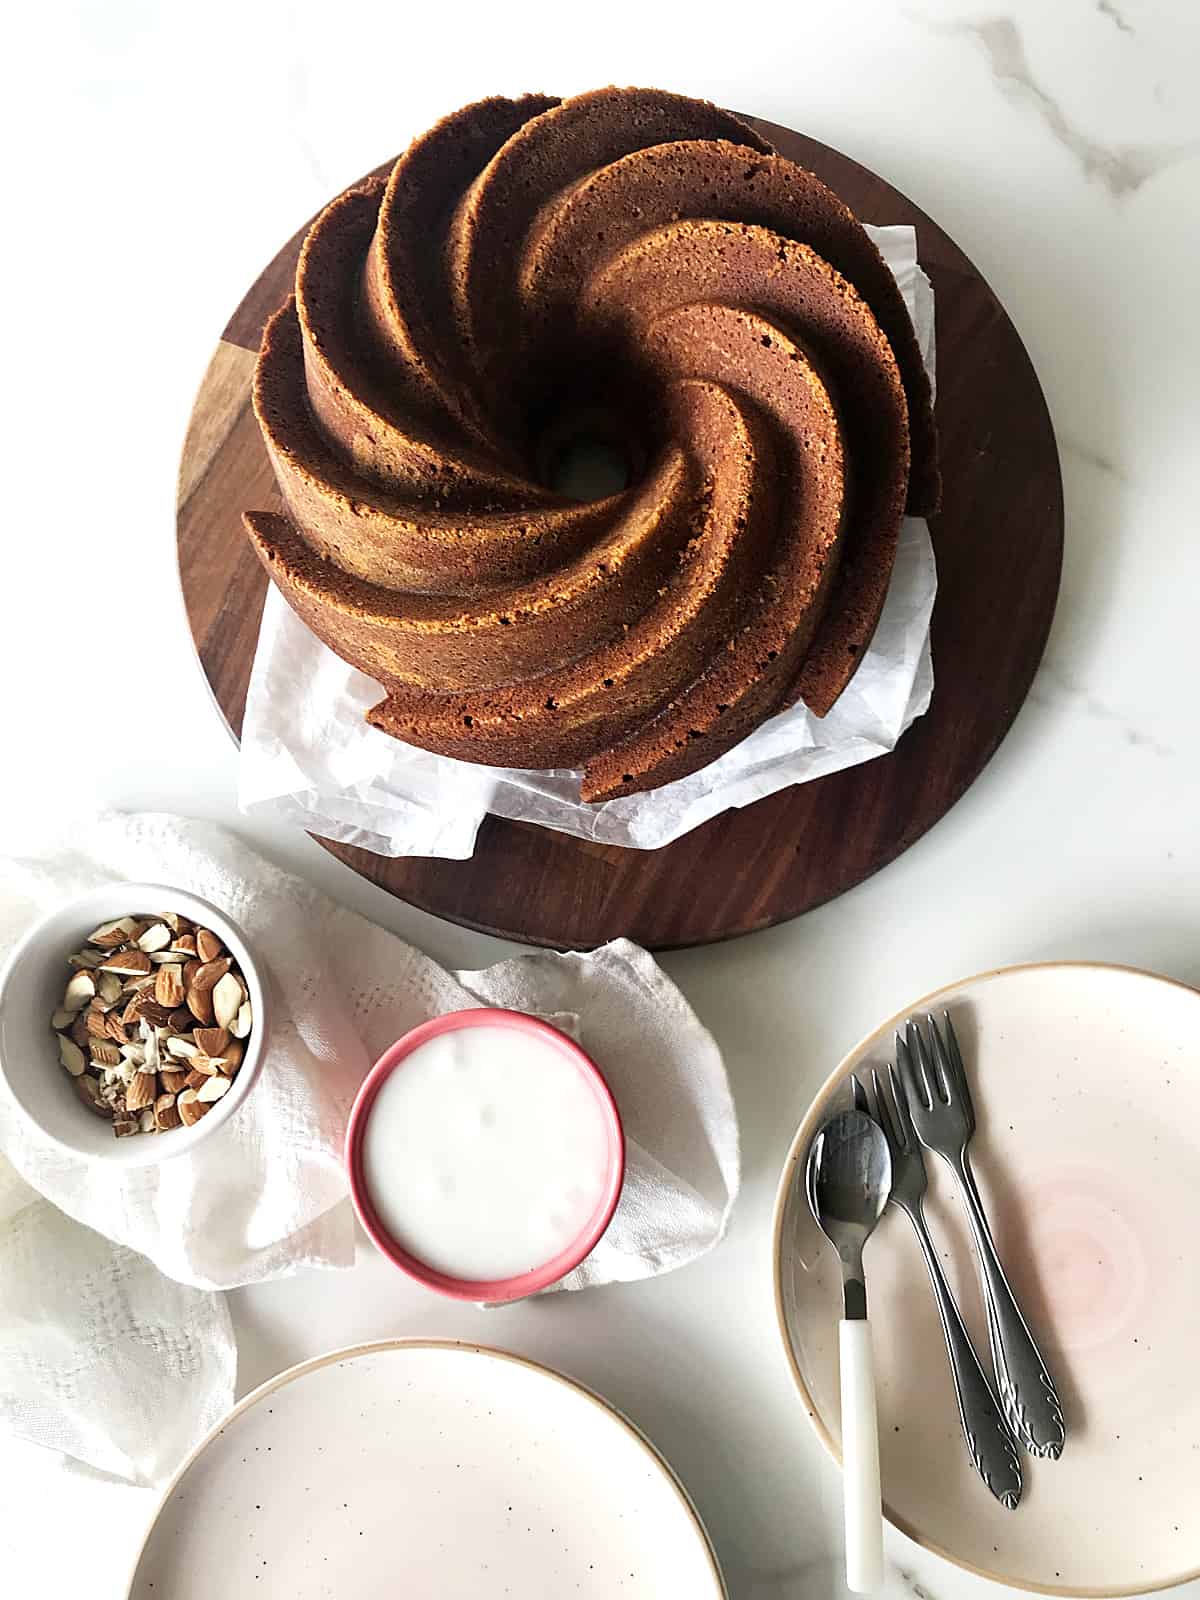 Bundt cake on wooden round board, plates, forks and bowls with almonds and glaze